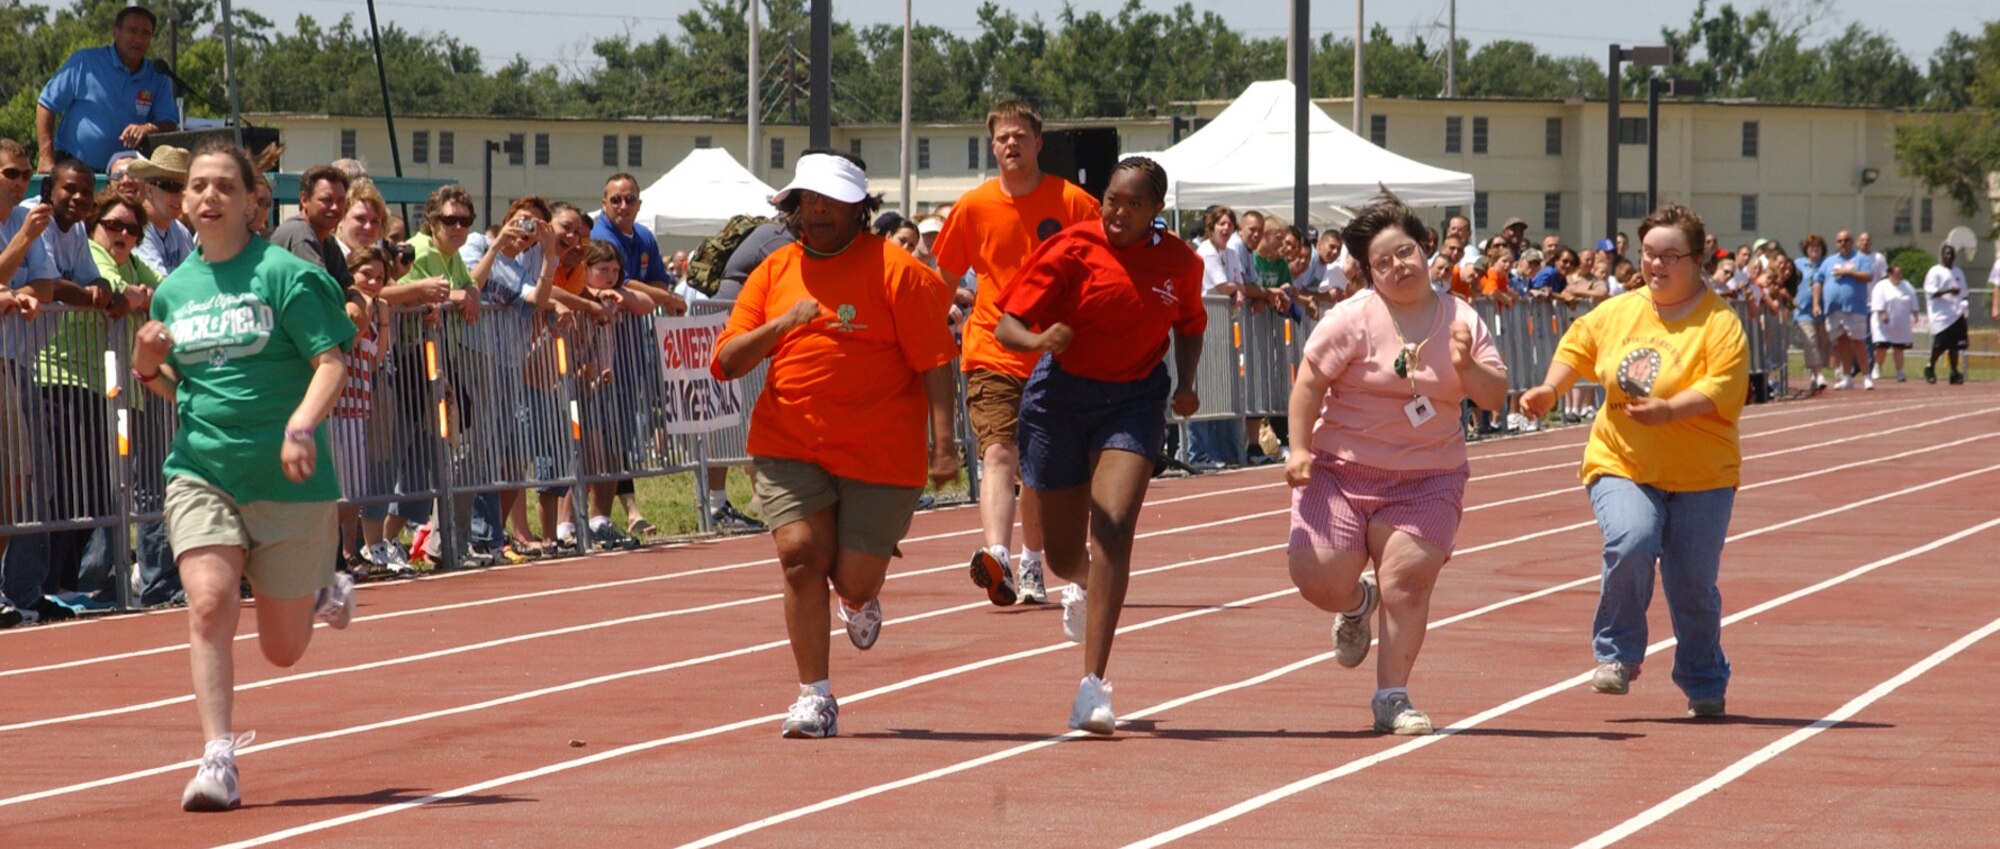 Athletes Melissa Thomas, Rickeya McCoy, Lawson Christopher, Marquitta Moore, Angela Raney and Lacey Pierce, Area 10, sprint toward the finish line in the 50-meter-dash Saturday at the Triangle track.  (U. S. Air Force Photo by Kemberly Groue)